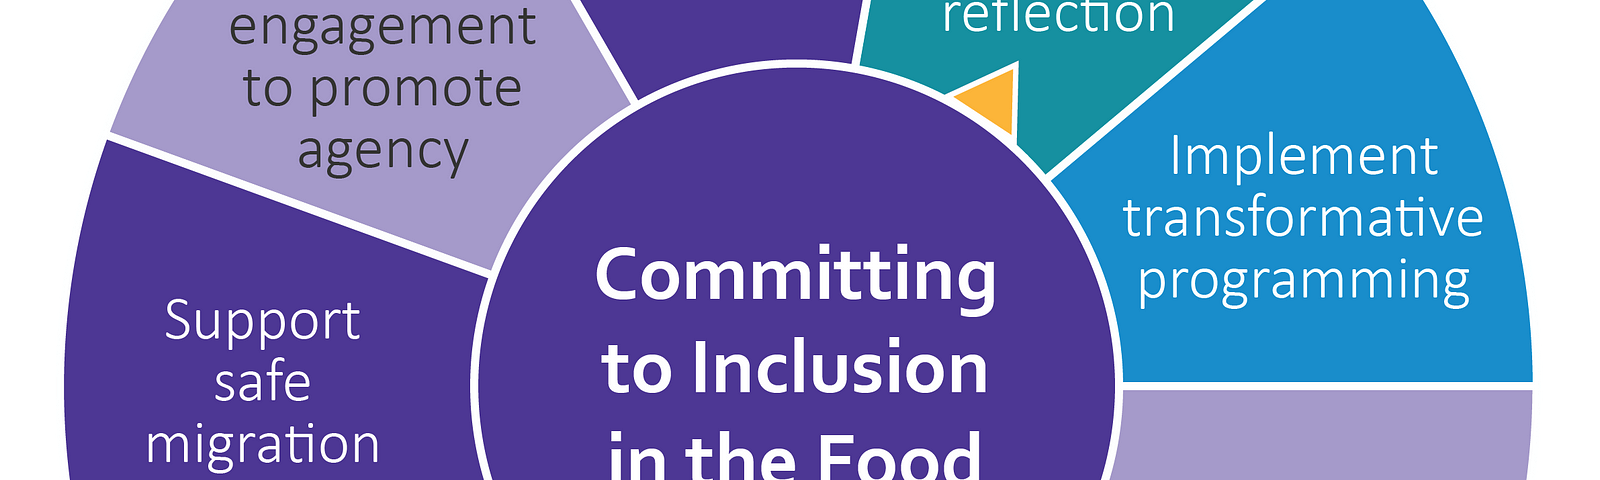 A graphic illustration of Committing to Inclusion in the Food Crisis, as a wheel. Clockwise from the top in alternating colors are the following text sections: Regular data analysis and reflection, implement transformative programming, incorporate lessons learned, standalone budgets for gender and youth, no sectoral siloes, engage the private sector, support safe migration, meaningful engagement to promote agency, and improve data collection.